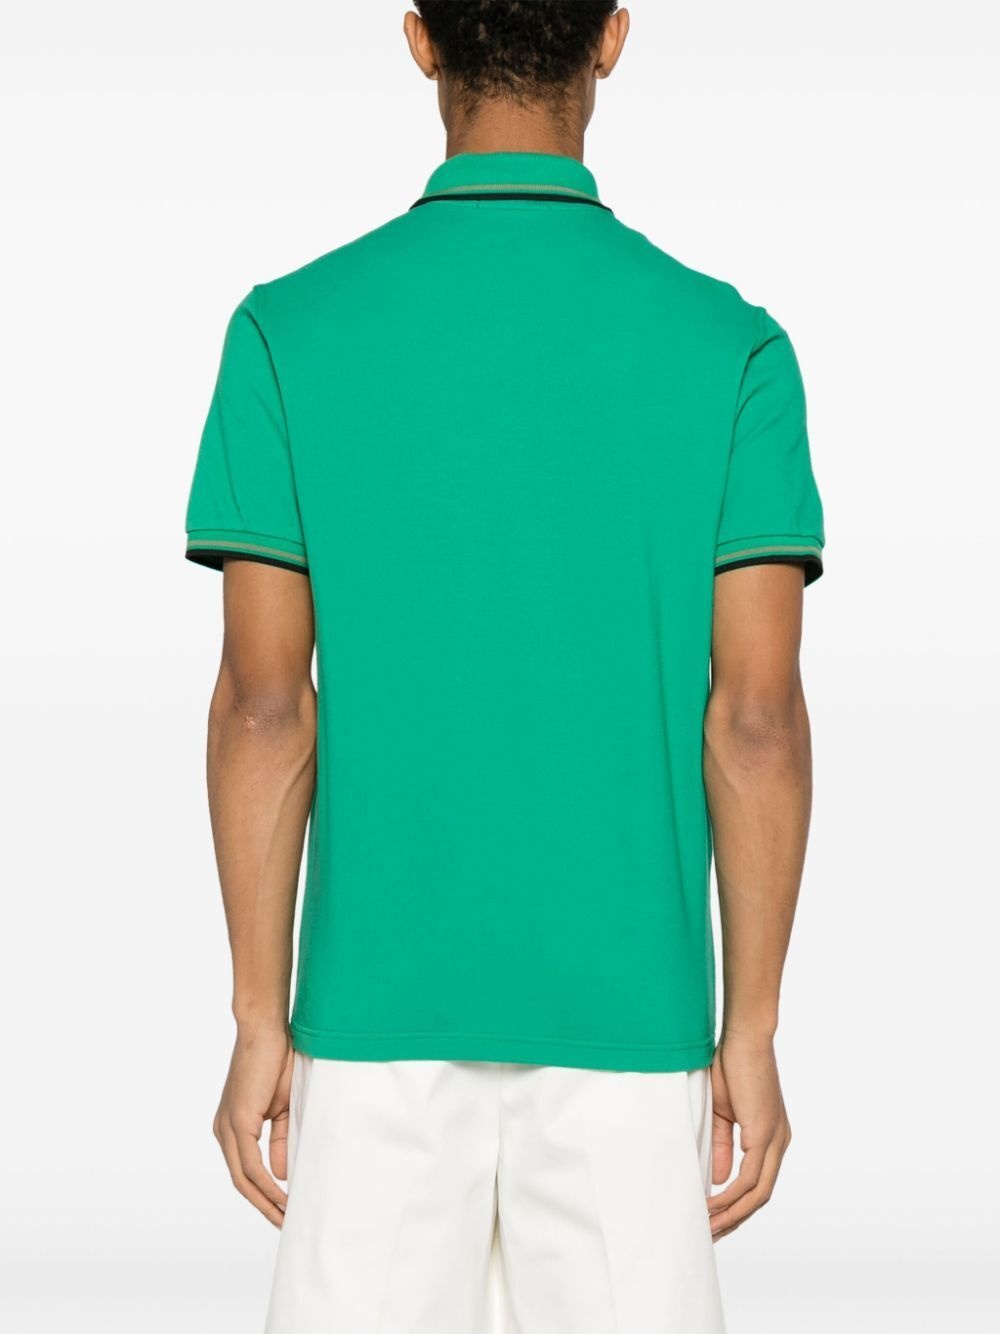 FP TWIN TIPPED FRED PERRY SHIRT - 3